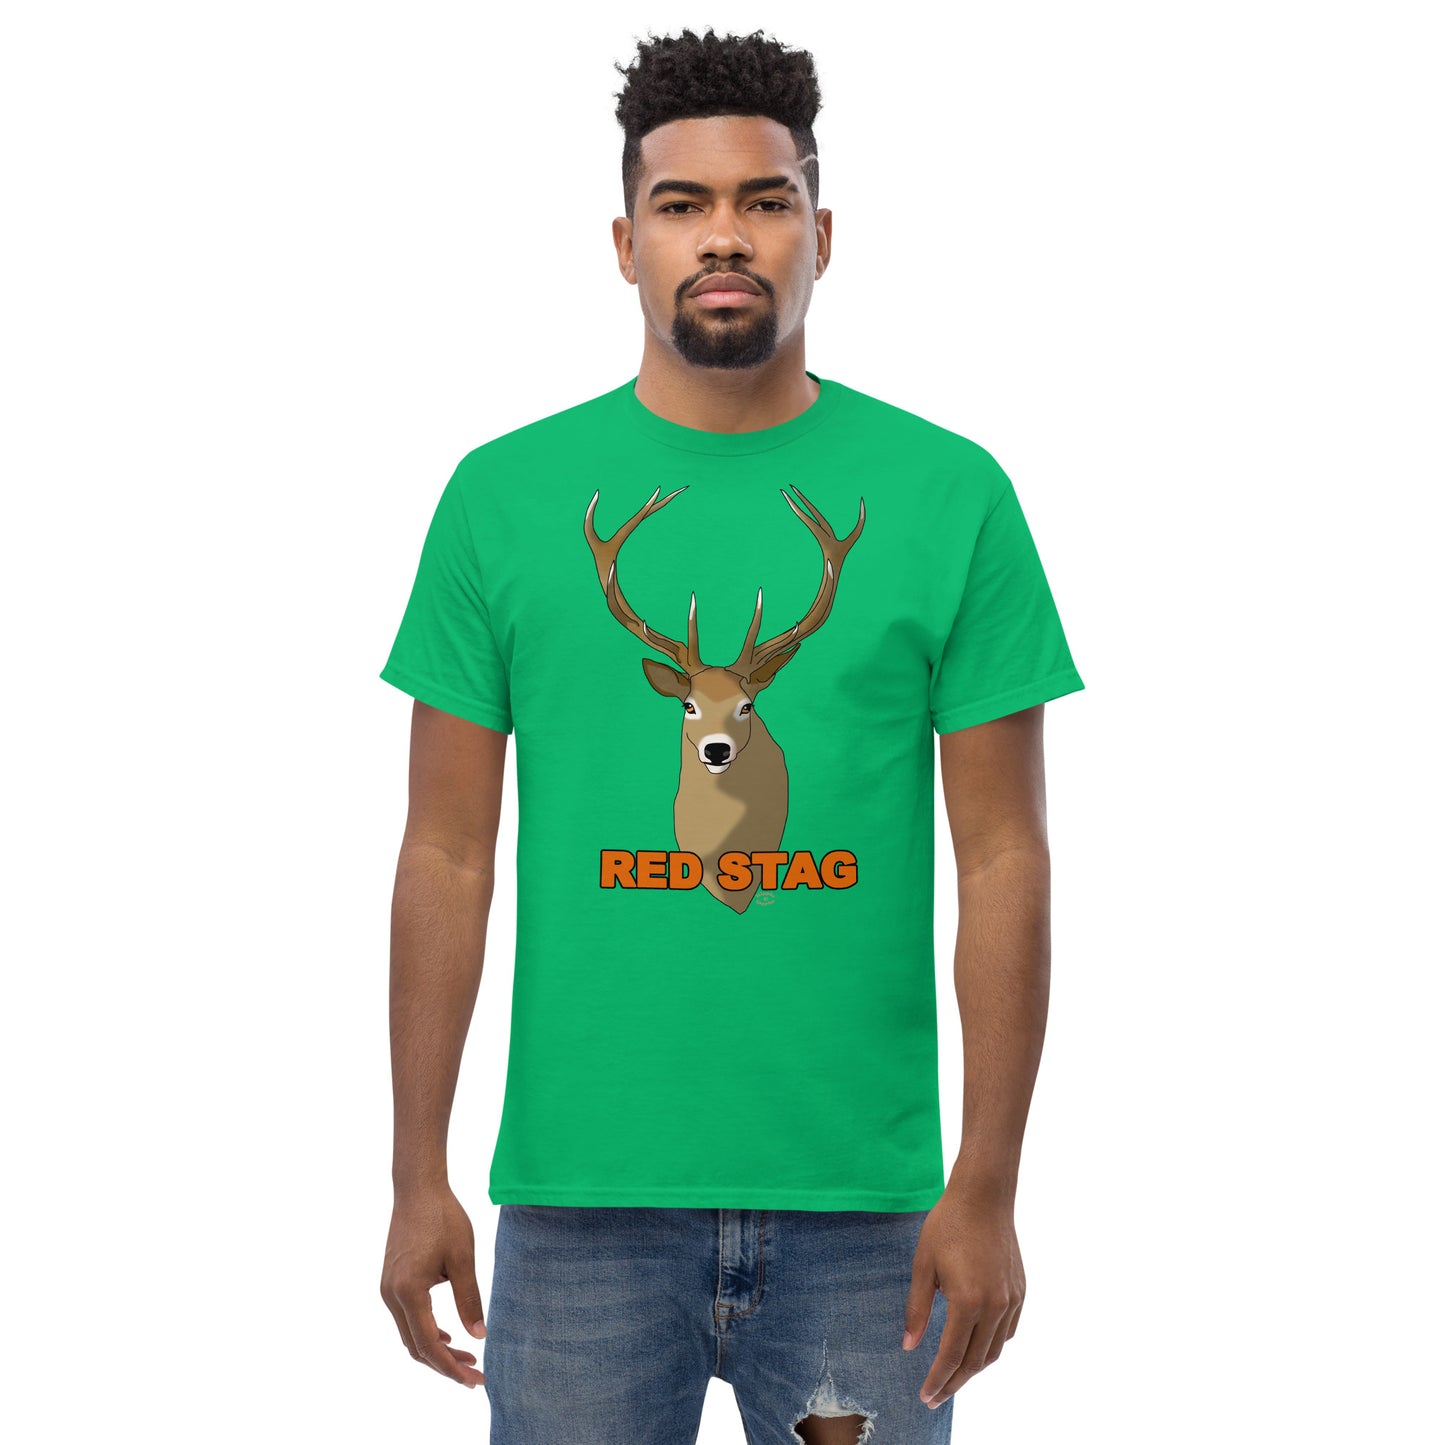 "Red Stag" Men's Classic Tee